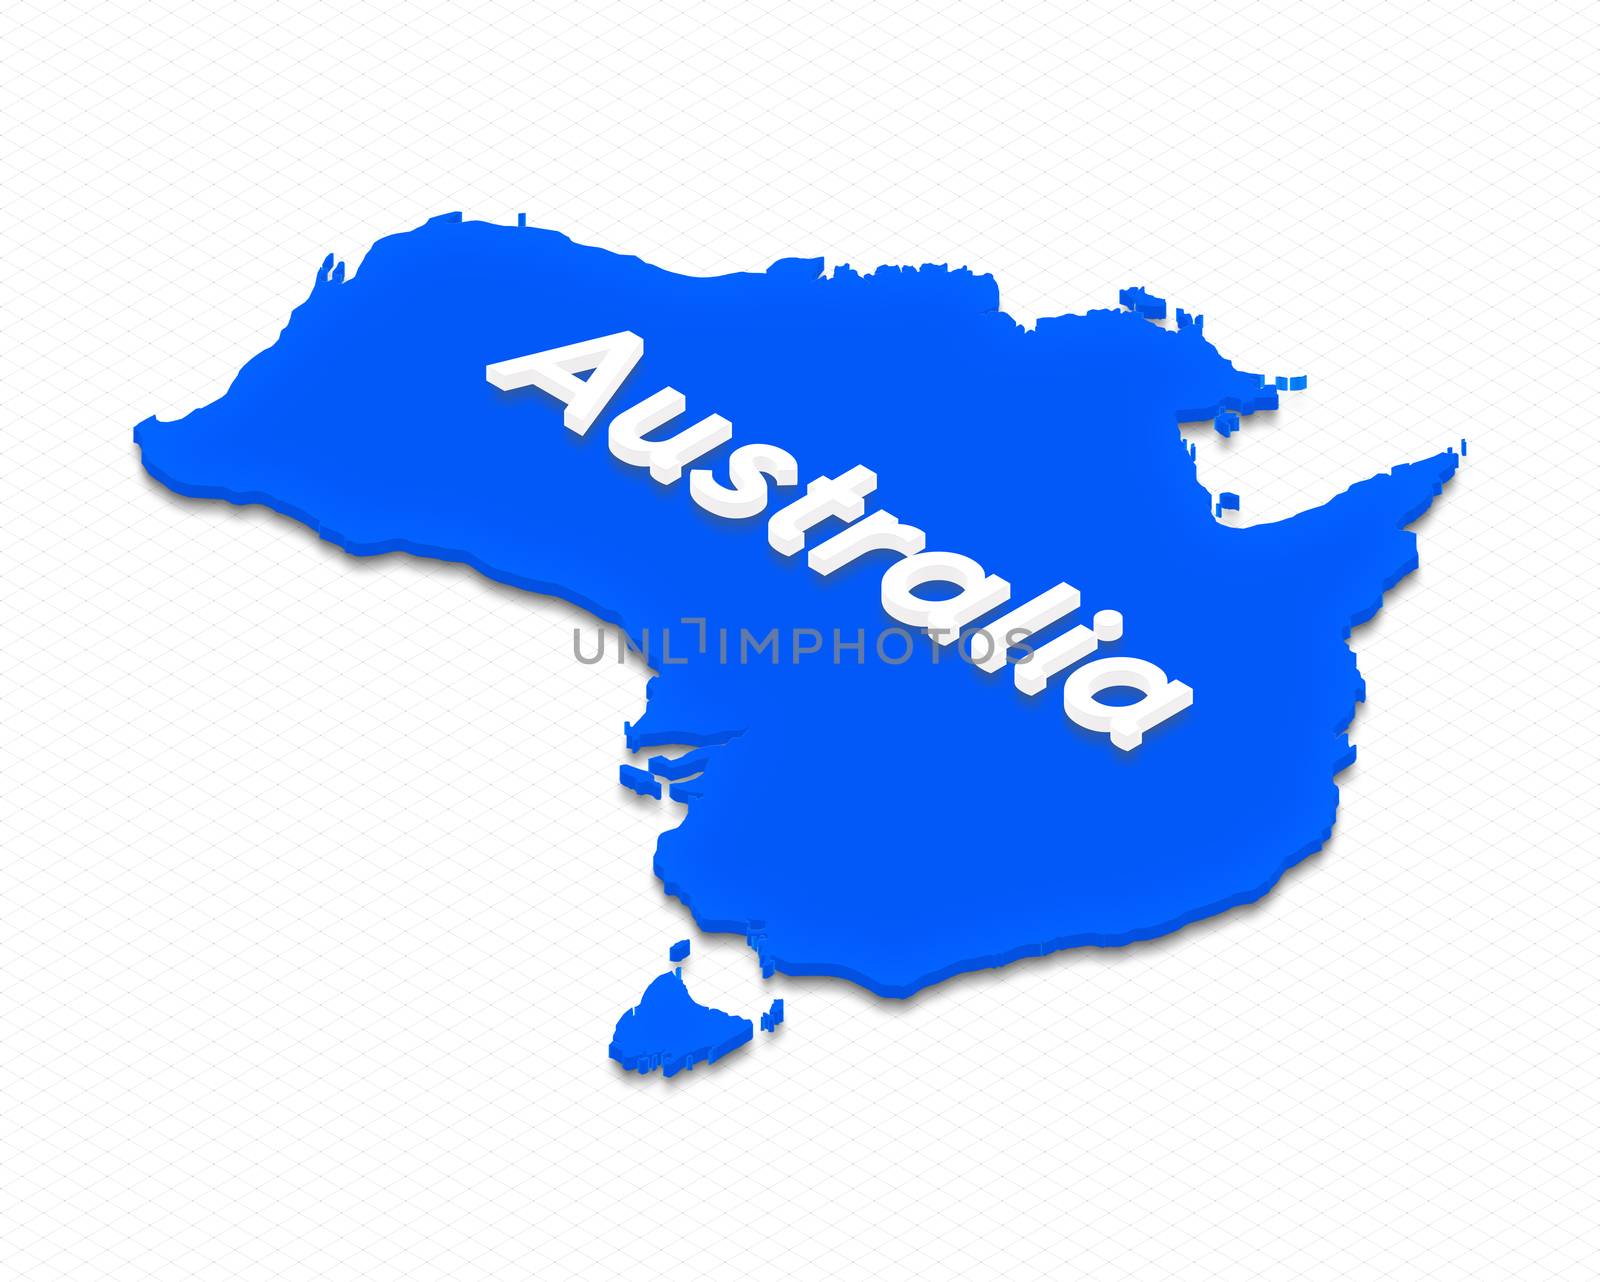 Illustration of a blue ground map of Australia on grid background. Left 3D isometric projection with the name of continent.